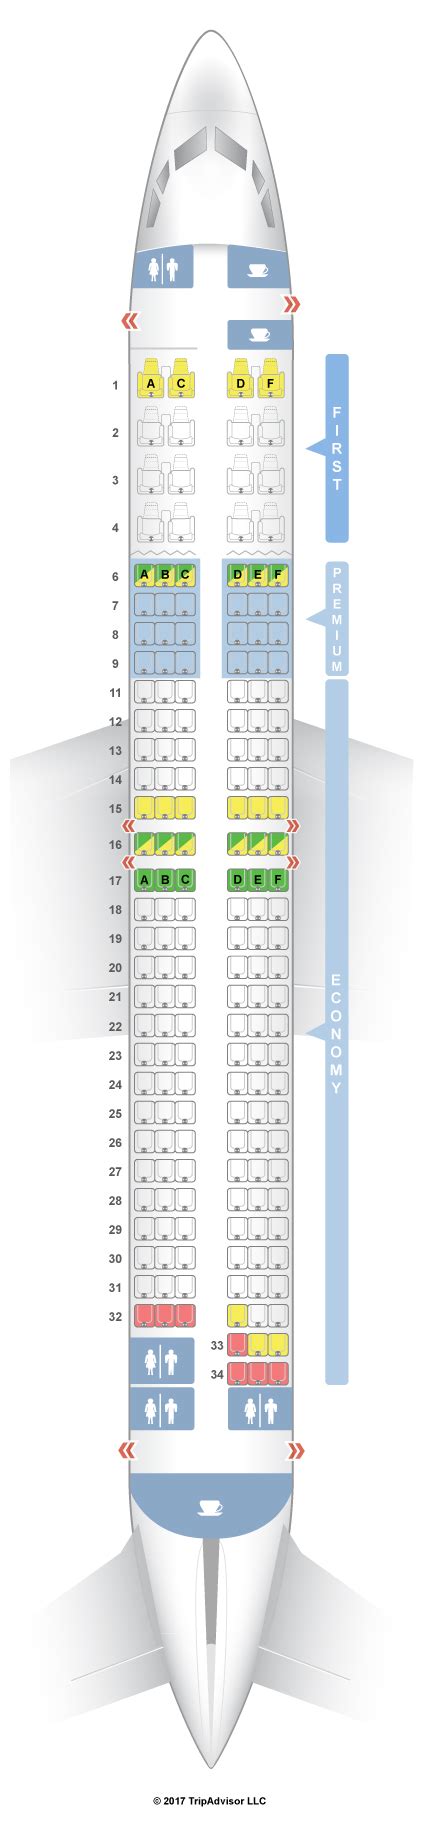 Our picks: rows 6 (curtain in front) and 17, rows 1-3. Avoid 10A and 32D at all costs. Featuring Alaska's new Beyond experience via Recaro slimline seating (though everything on Alaska is "Beyond" something, according to their marketing collateral...), the 737-800 is a noticeably updated travel experience compared to Alaska's older jets. Each .... 